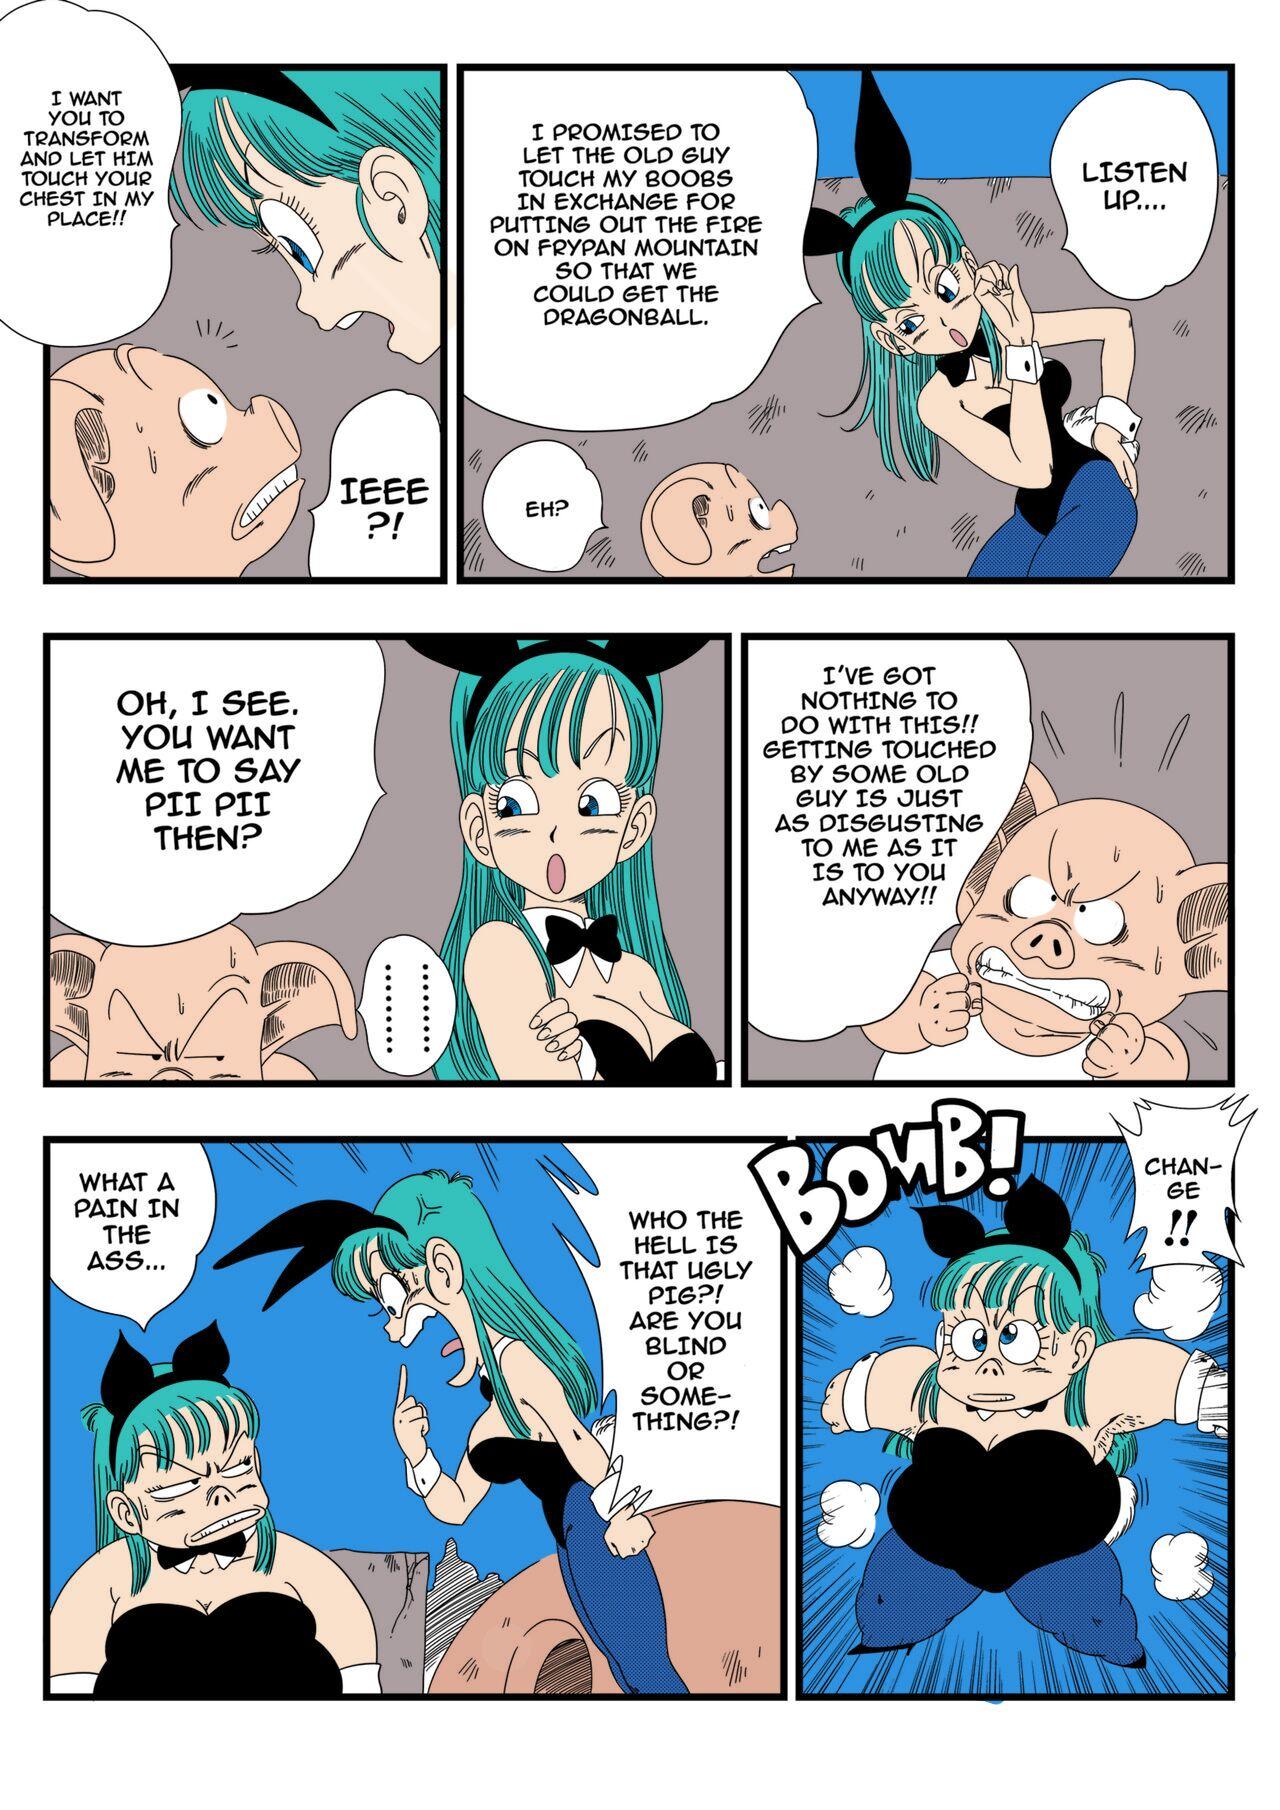 Young Bunny Girl Transformation Pussyeating - Page 4